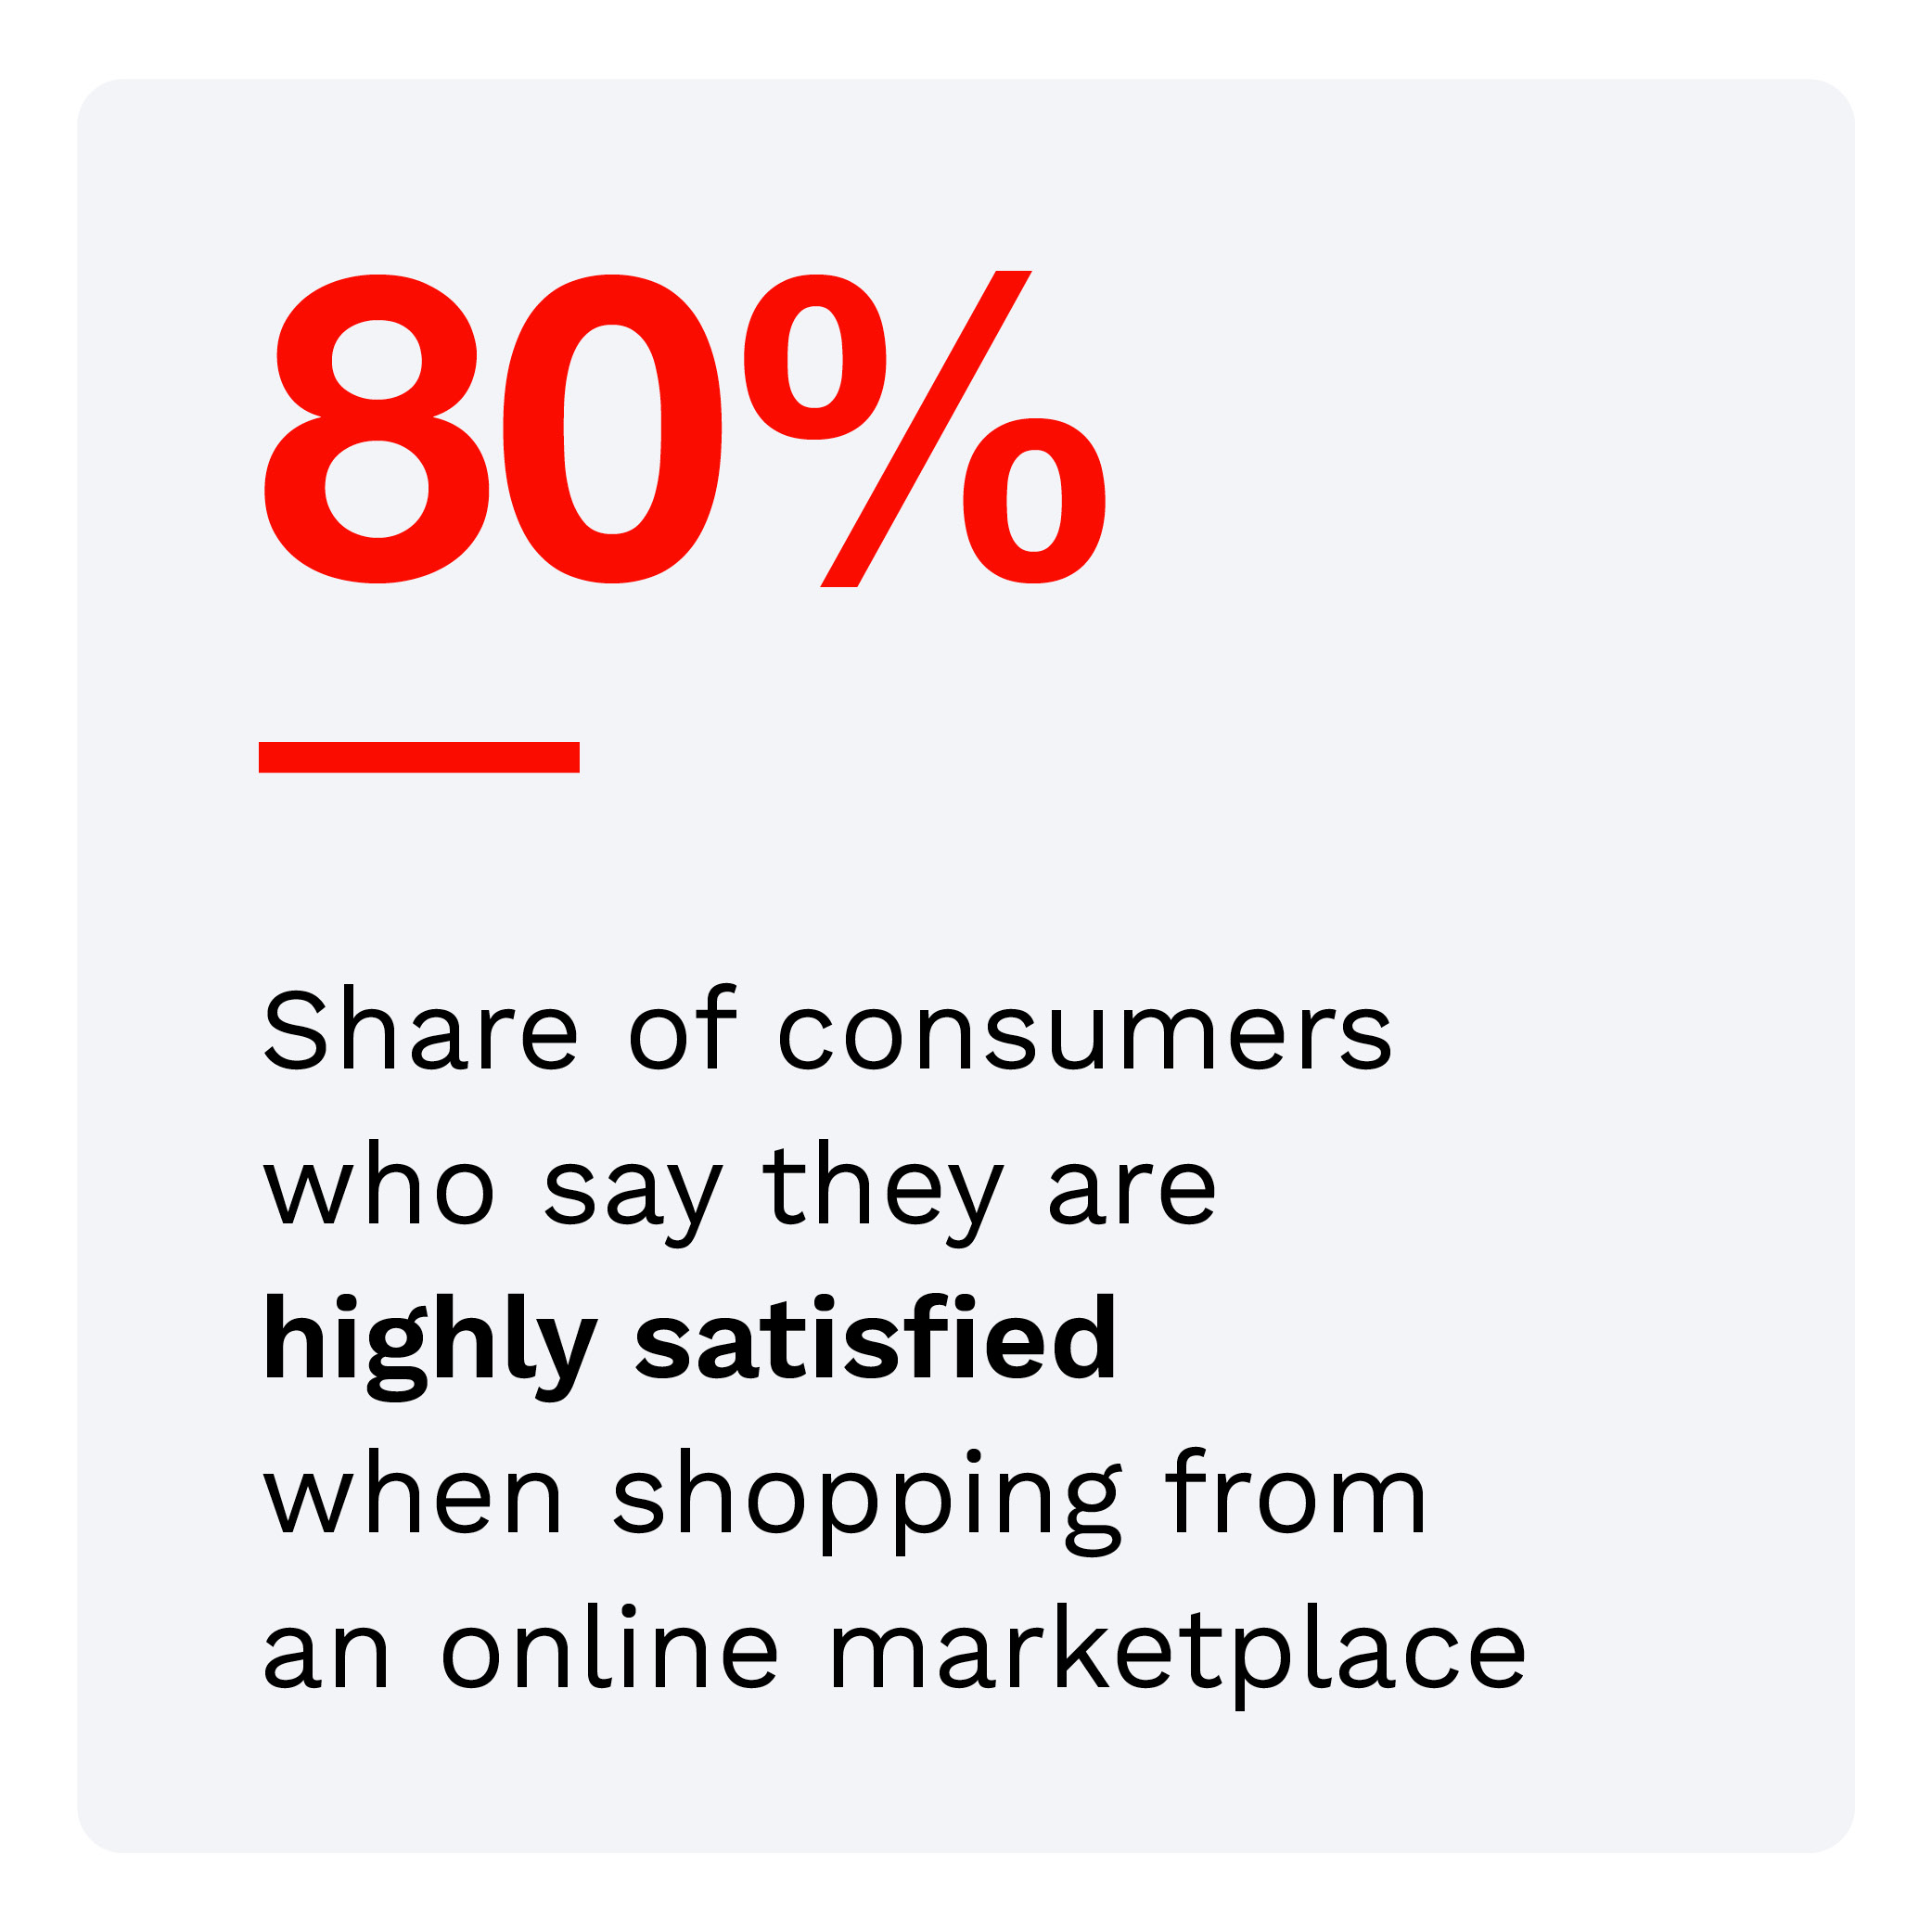 80%: Share of consumers who say they are highly satisfied when shopping from an online marketplace